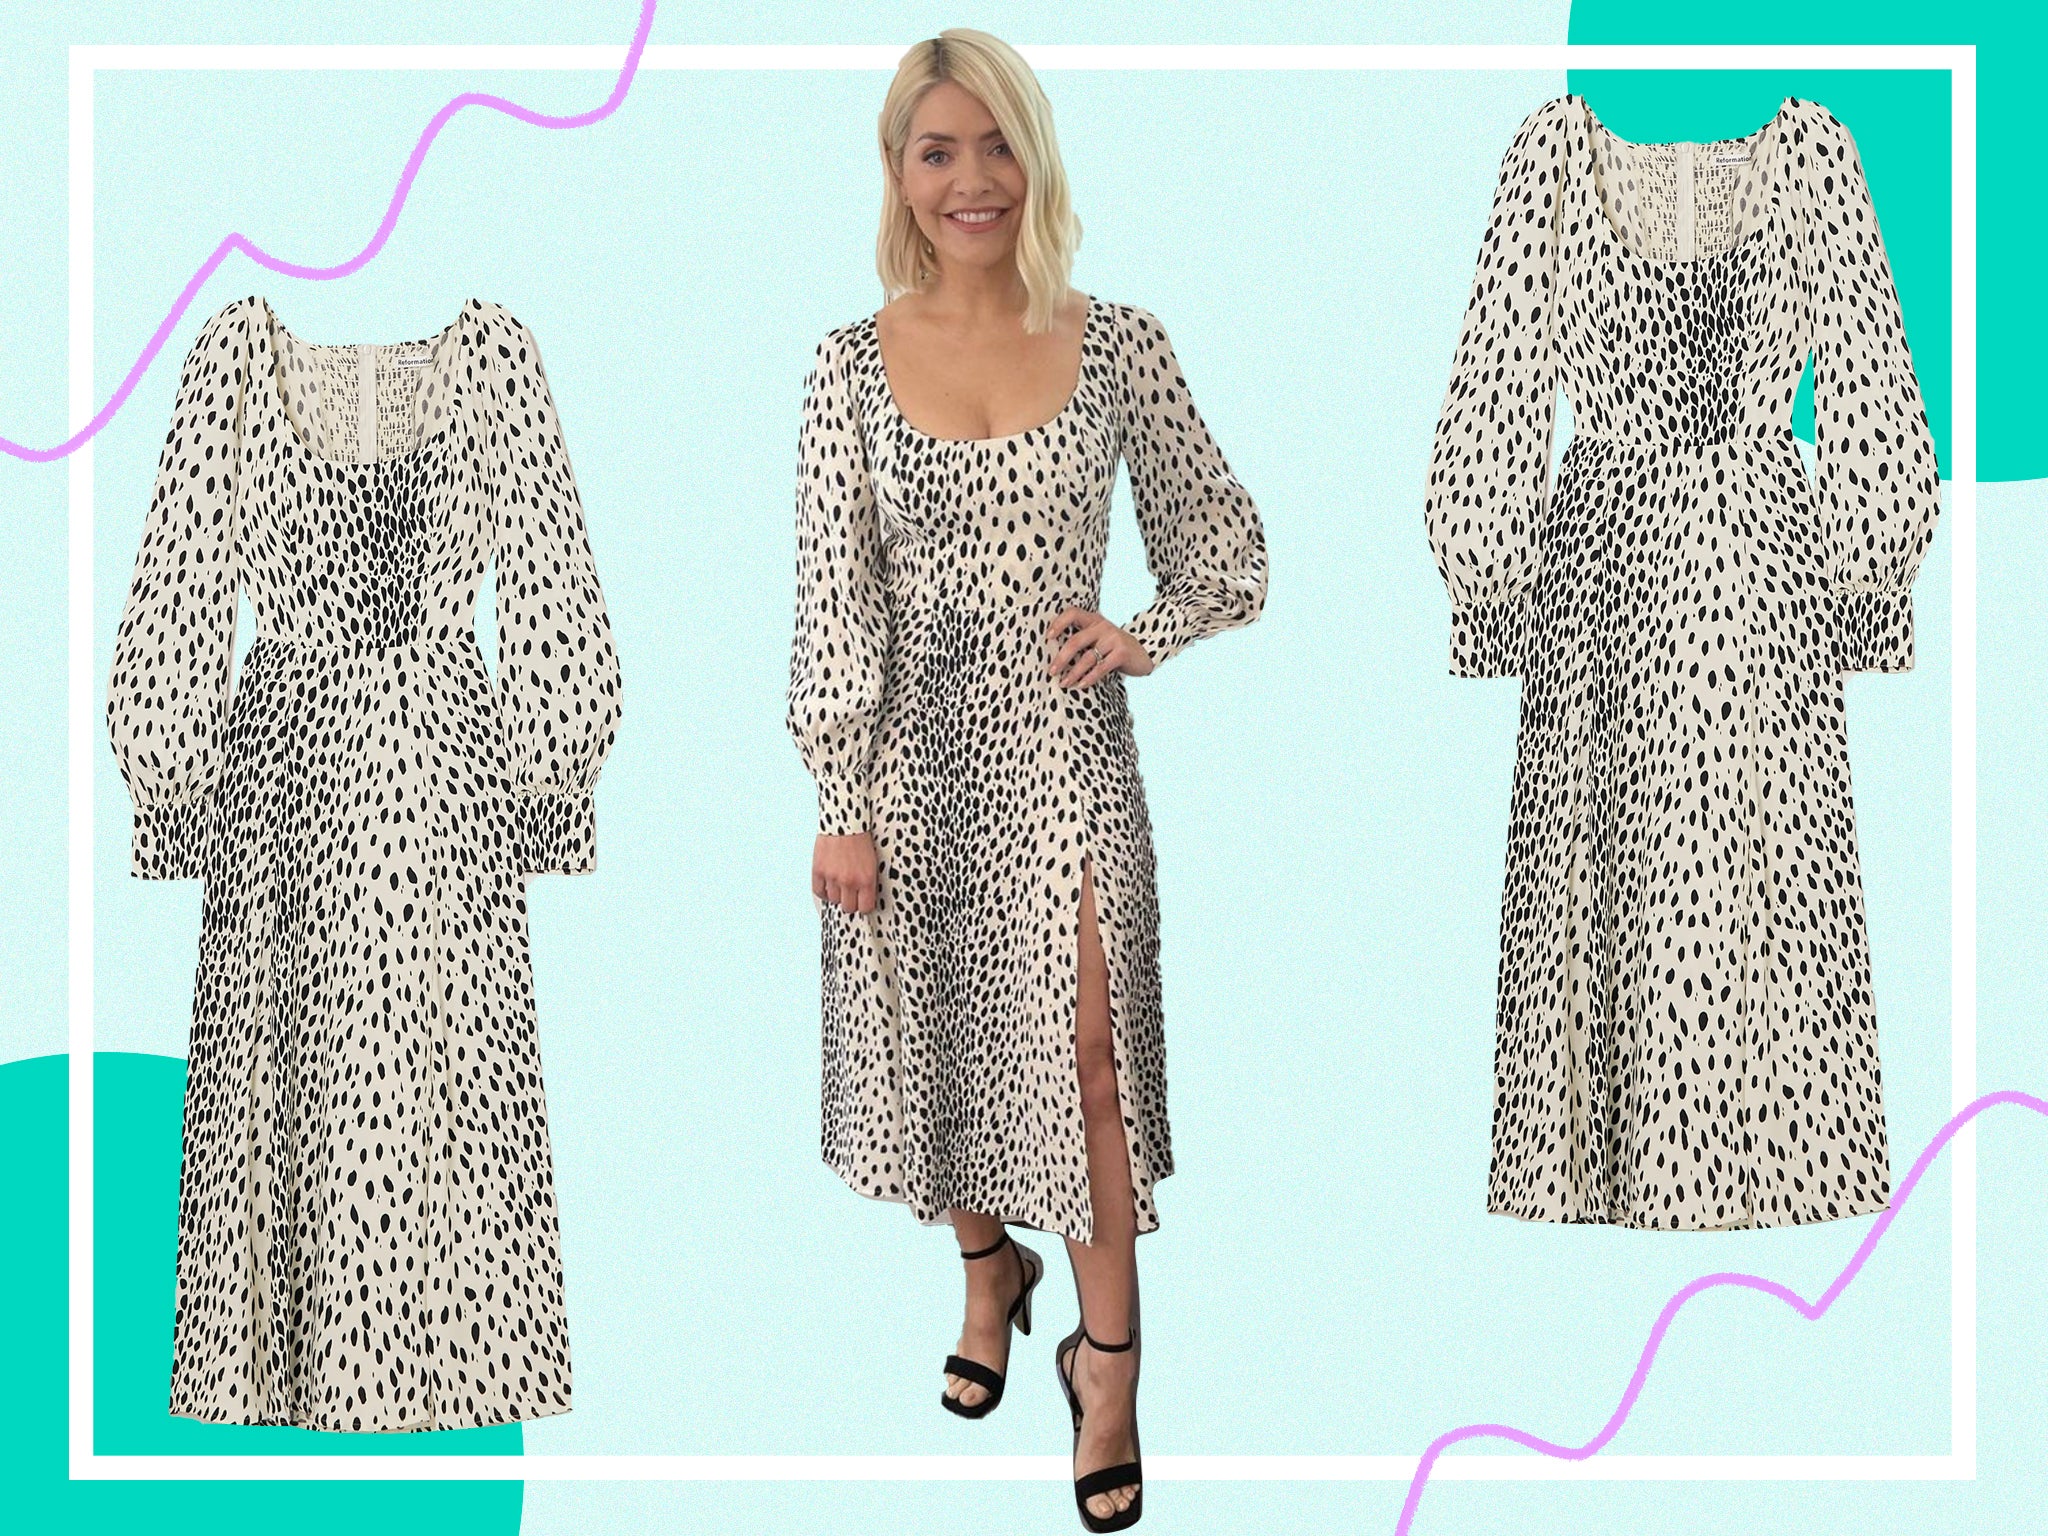 While more expensive than her usual high street outfits, this dress will stand the test of time